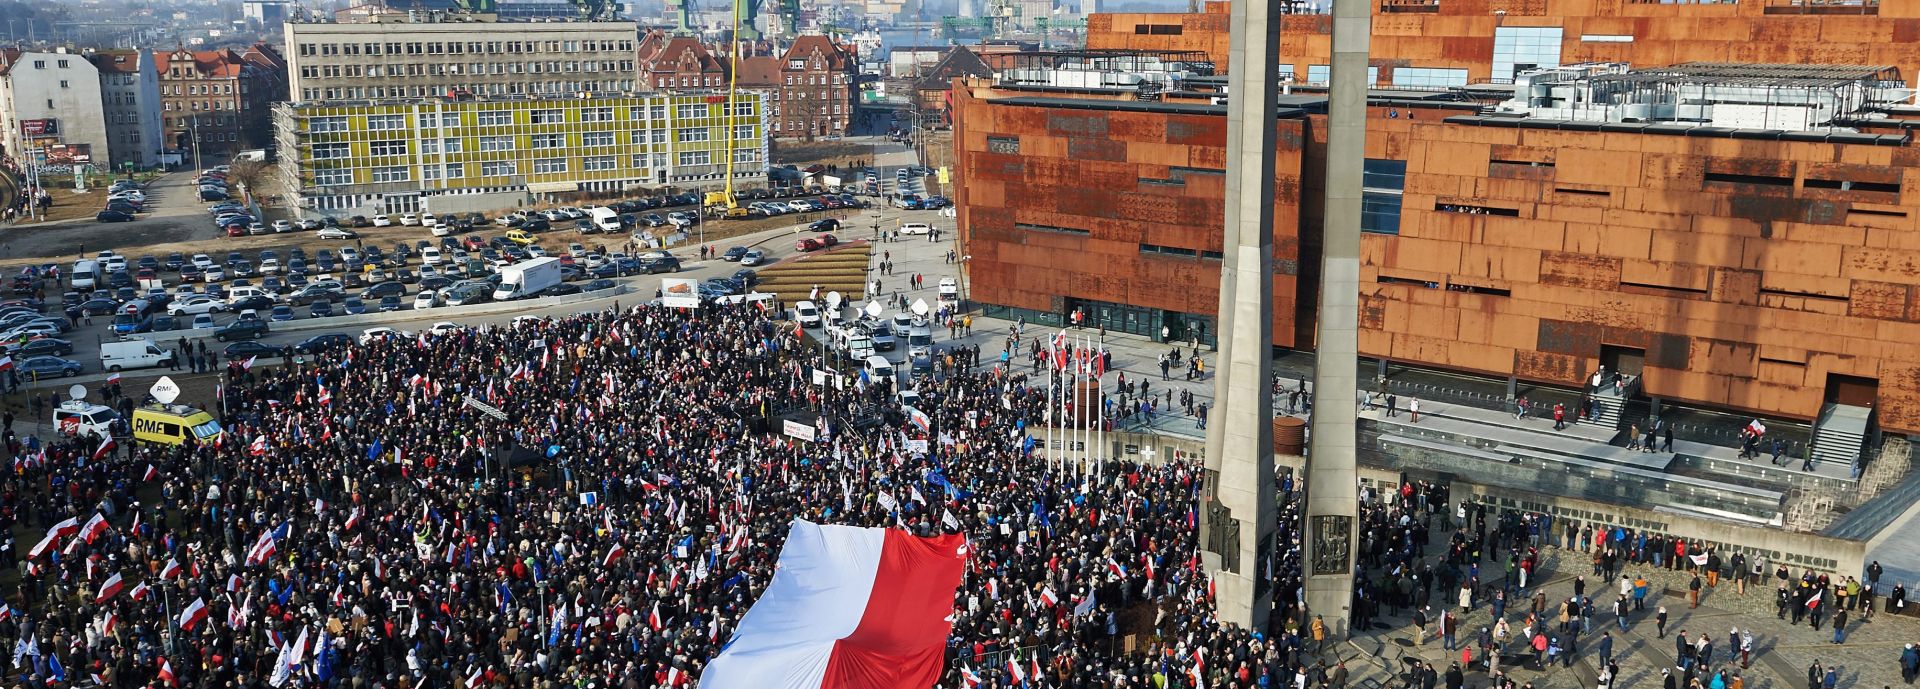 epa05185094 People during a rally in support of former Polish president Lech Walesa, in Gdansk, Poland, 28 February 2016. The event was held in support of first leader of Solidarity movement and former Polish president Lech Walesa, who was recently accused of being communist-era secret informer codenamed 'Bolek'.  EPA/ADAM WARZAWA POLAND OUT